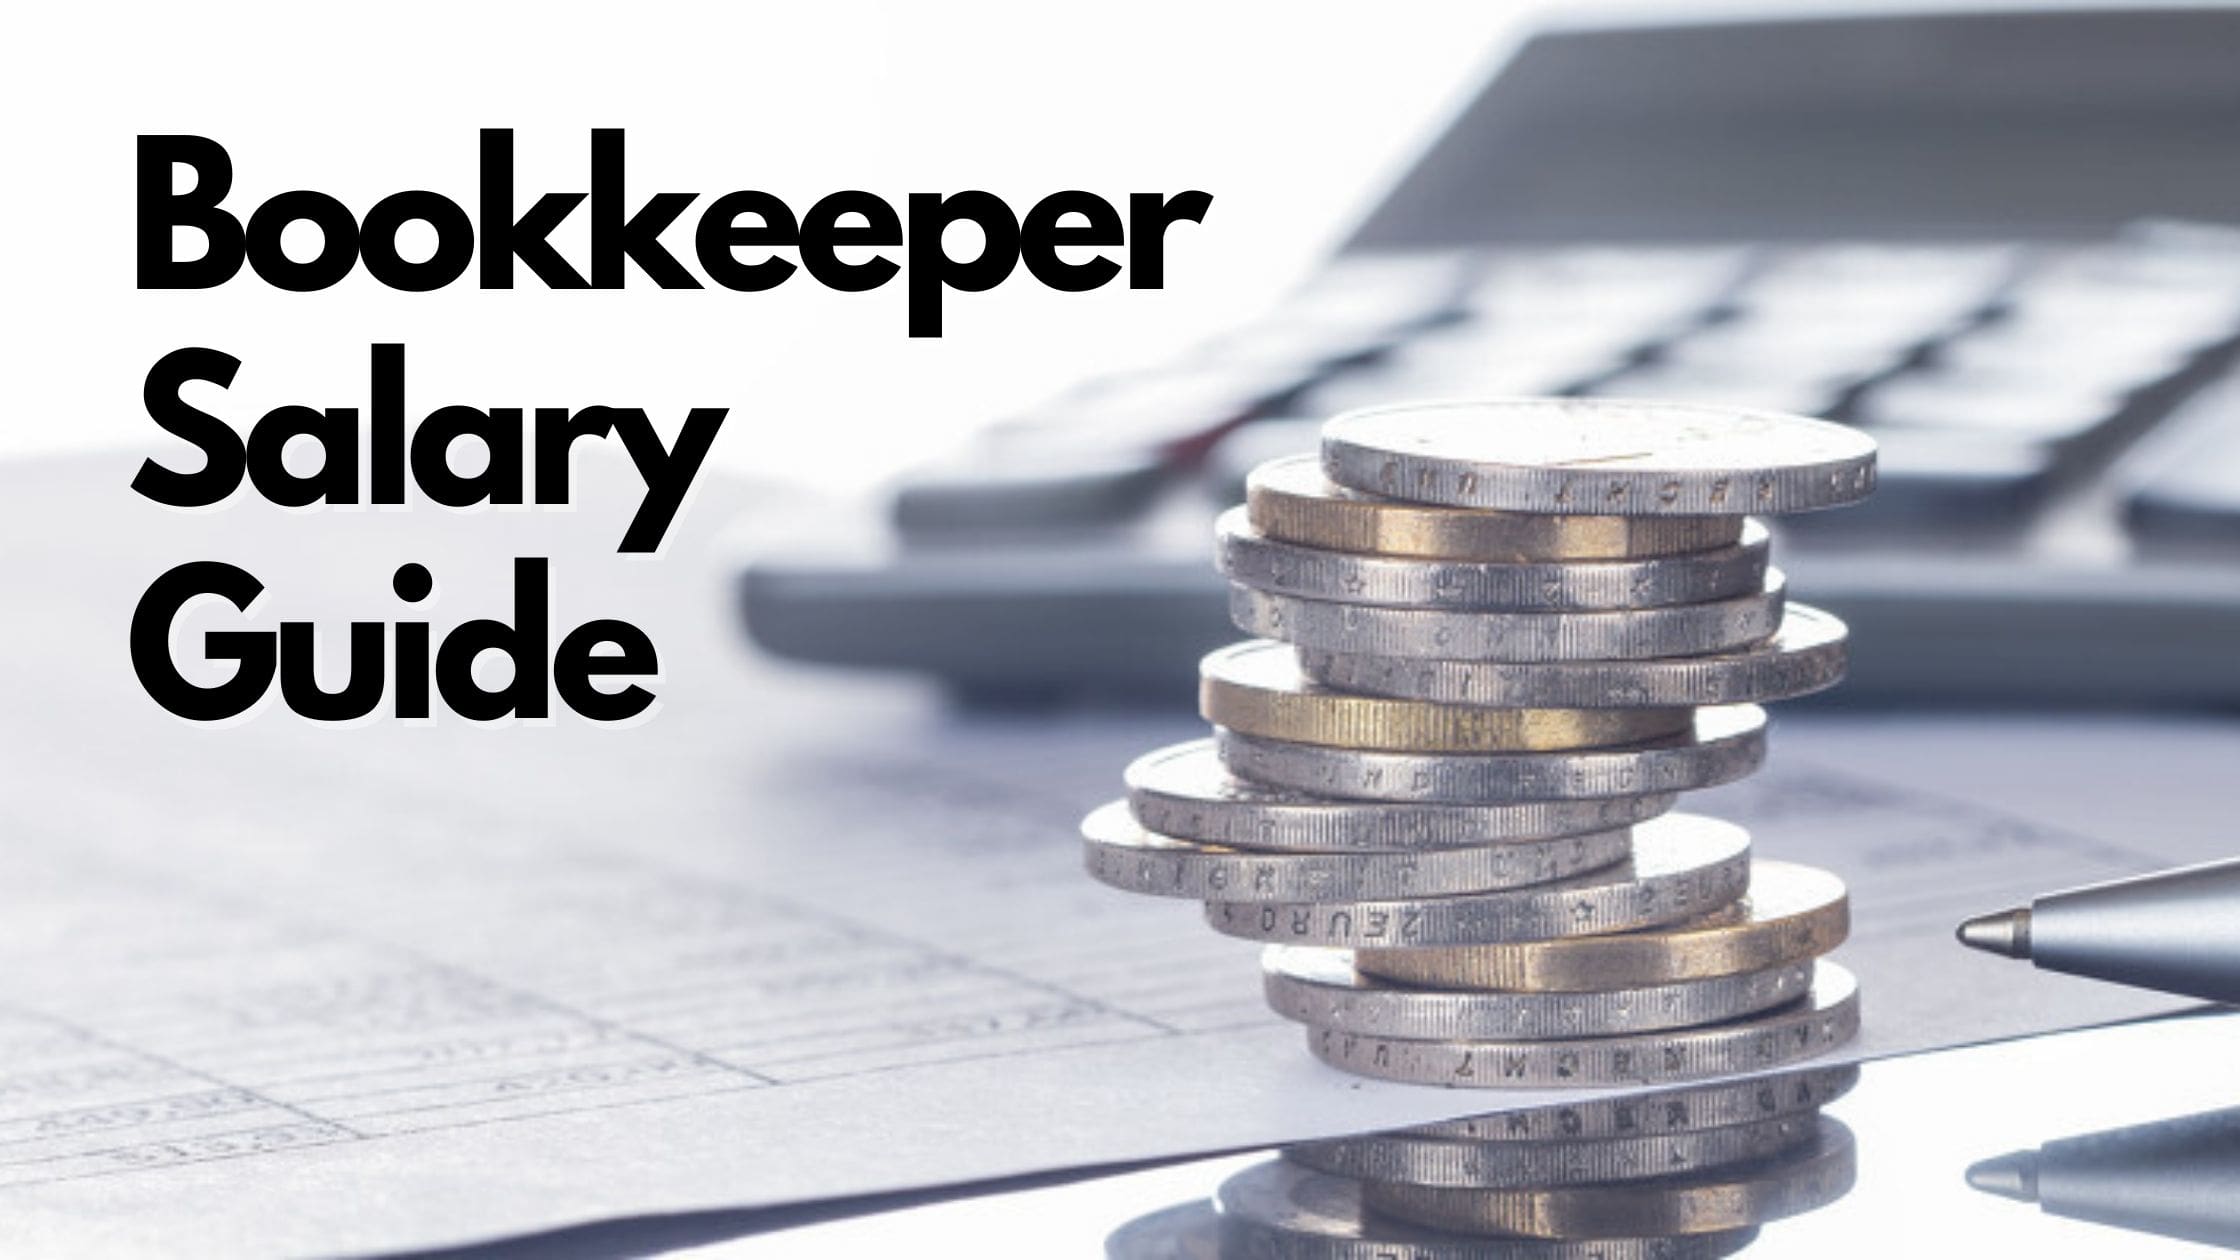 Bookkeeper Salary Guide